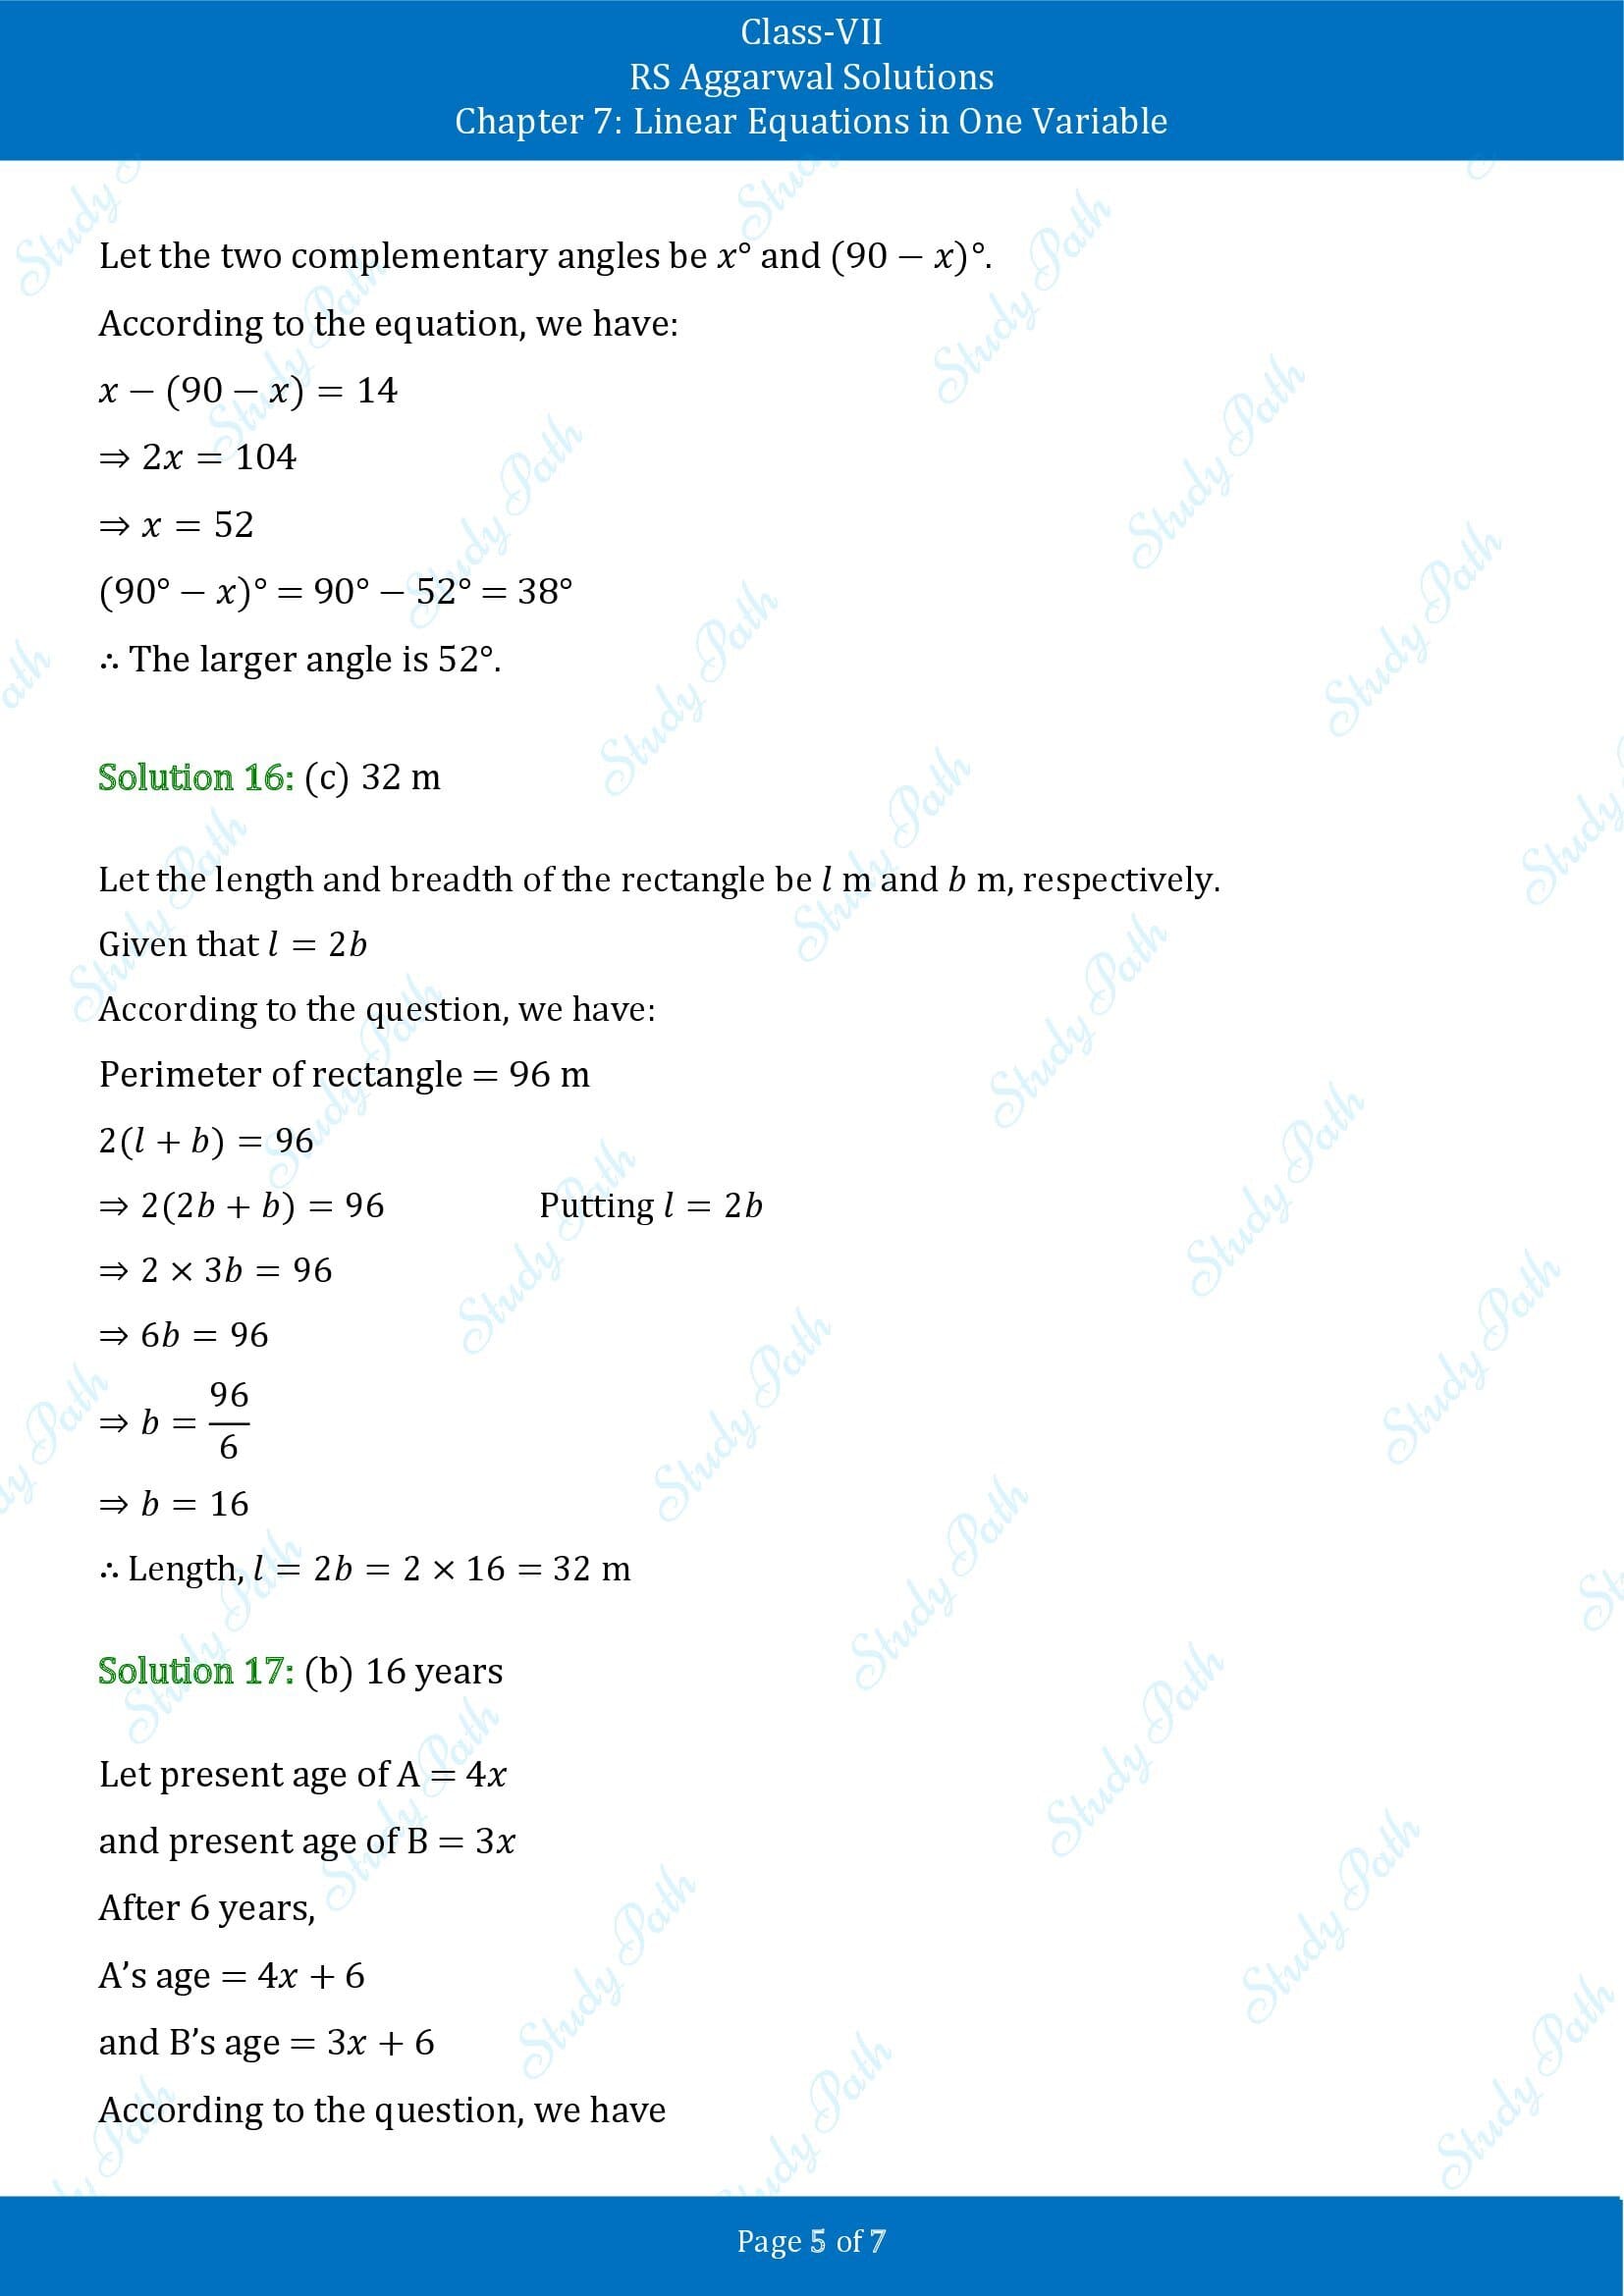 RS Aggarwal Solutions Class 7 Chapter 7 Linear Equations in One Variable Test Paper 00005